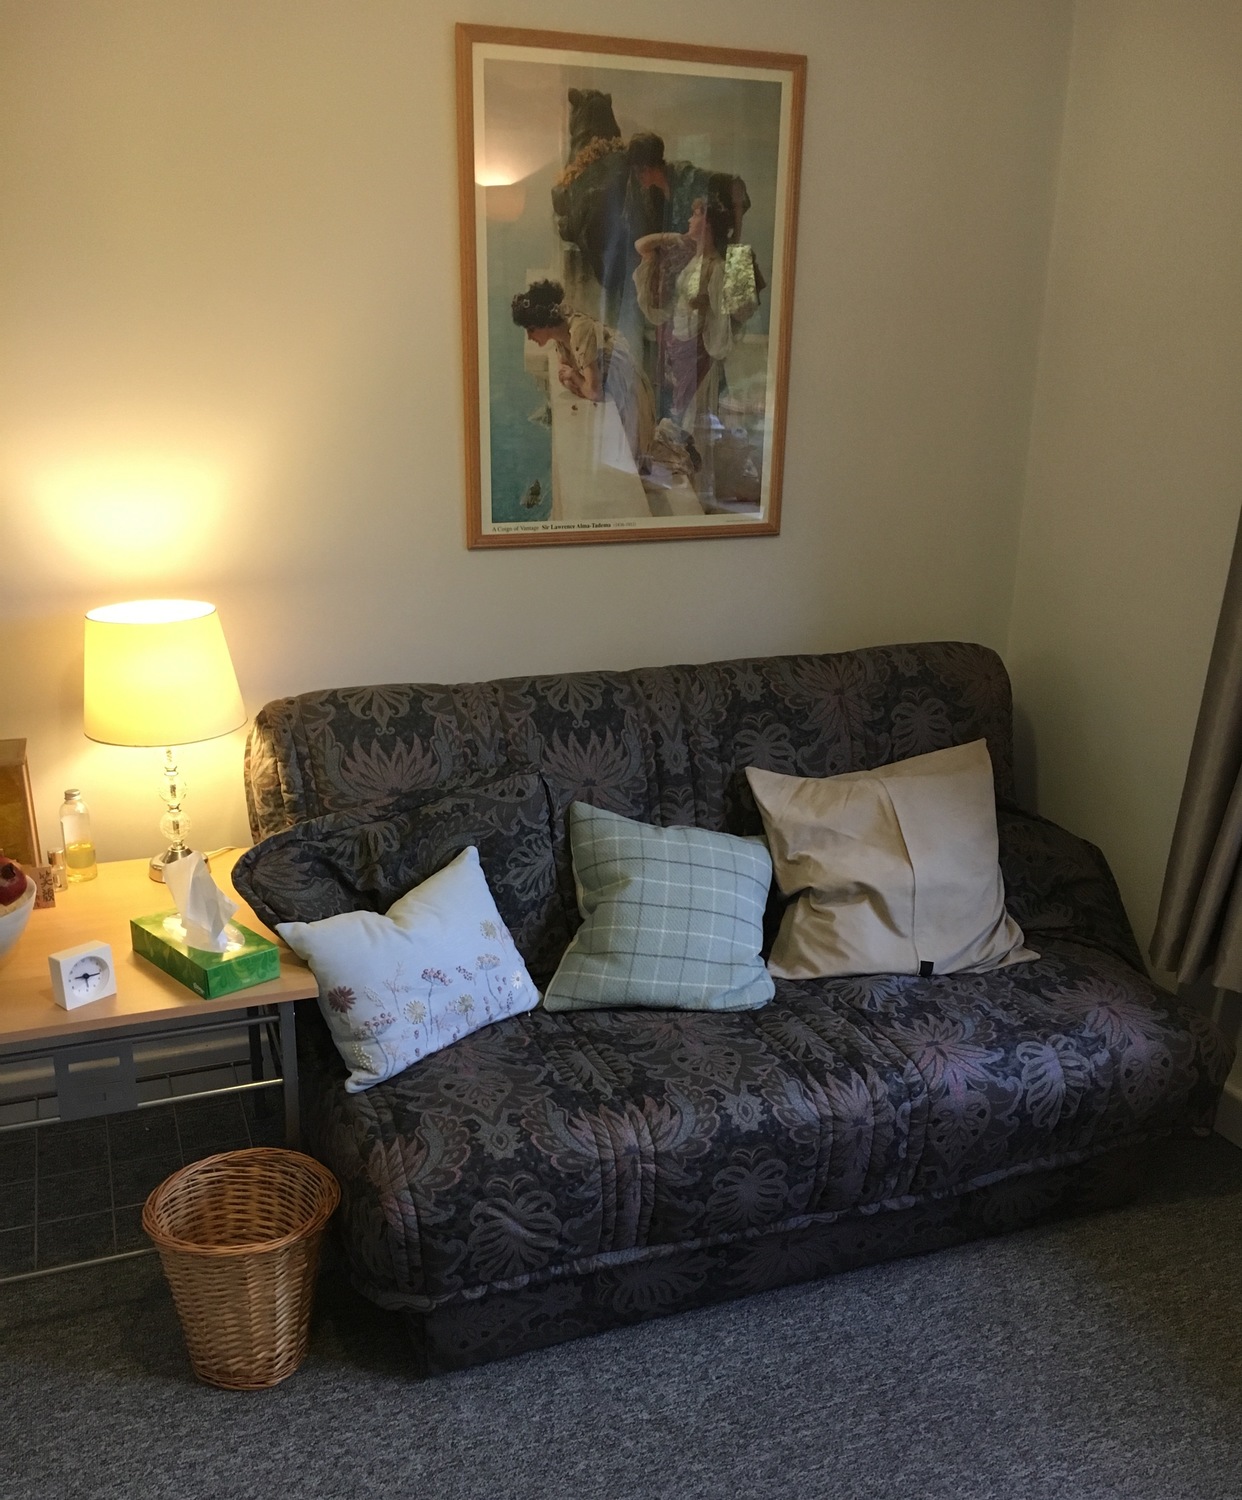 Gallery Photo of The Therapy Room - a comfortable space to talk and be listened to.